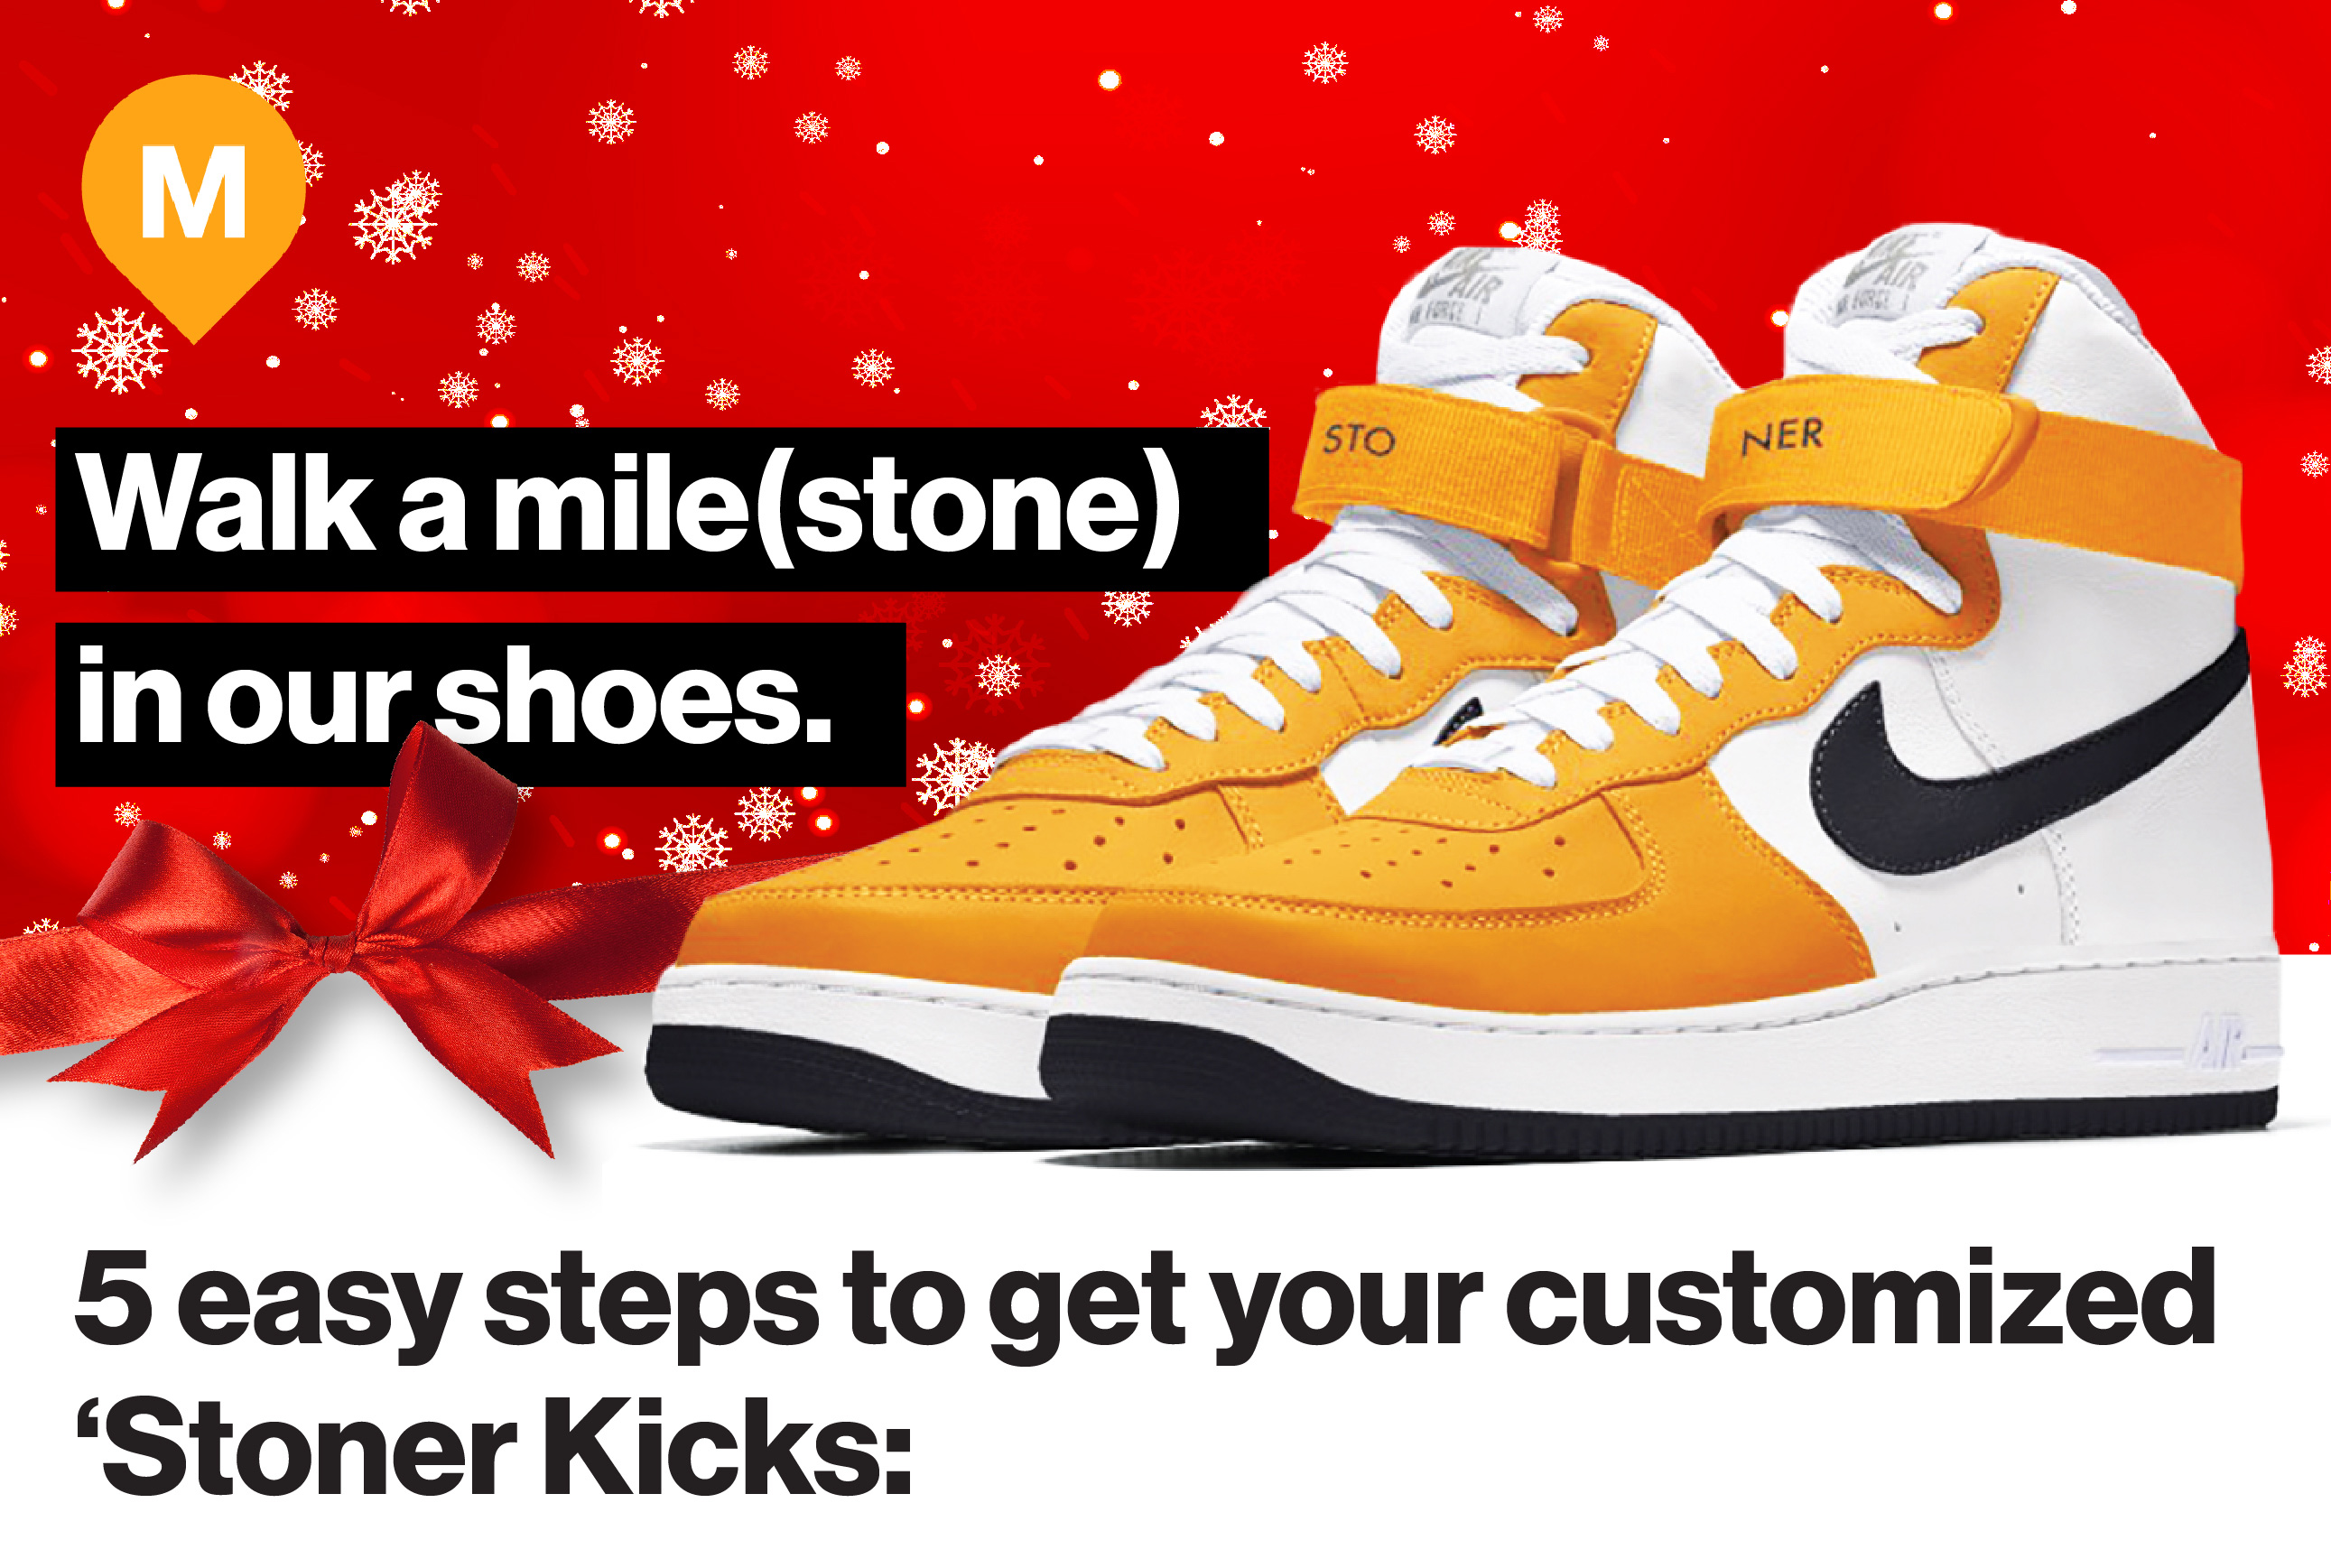 Walk a mile(stone) in our shoes. 5 easy steps to get your customized 'Stoner Kicks:'